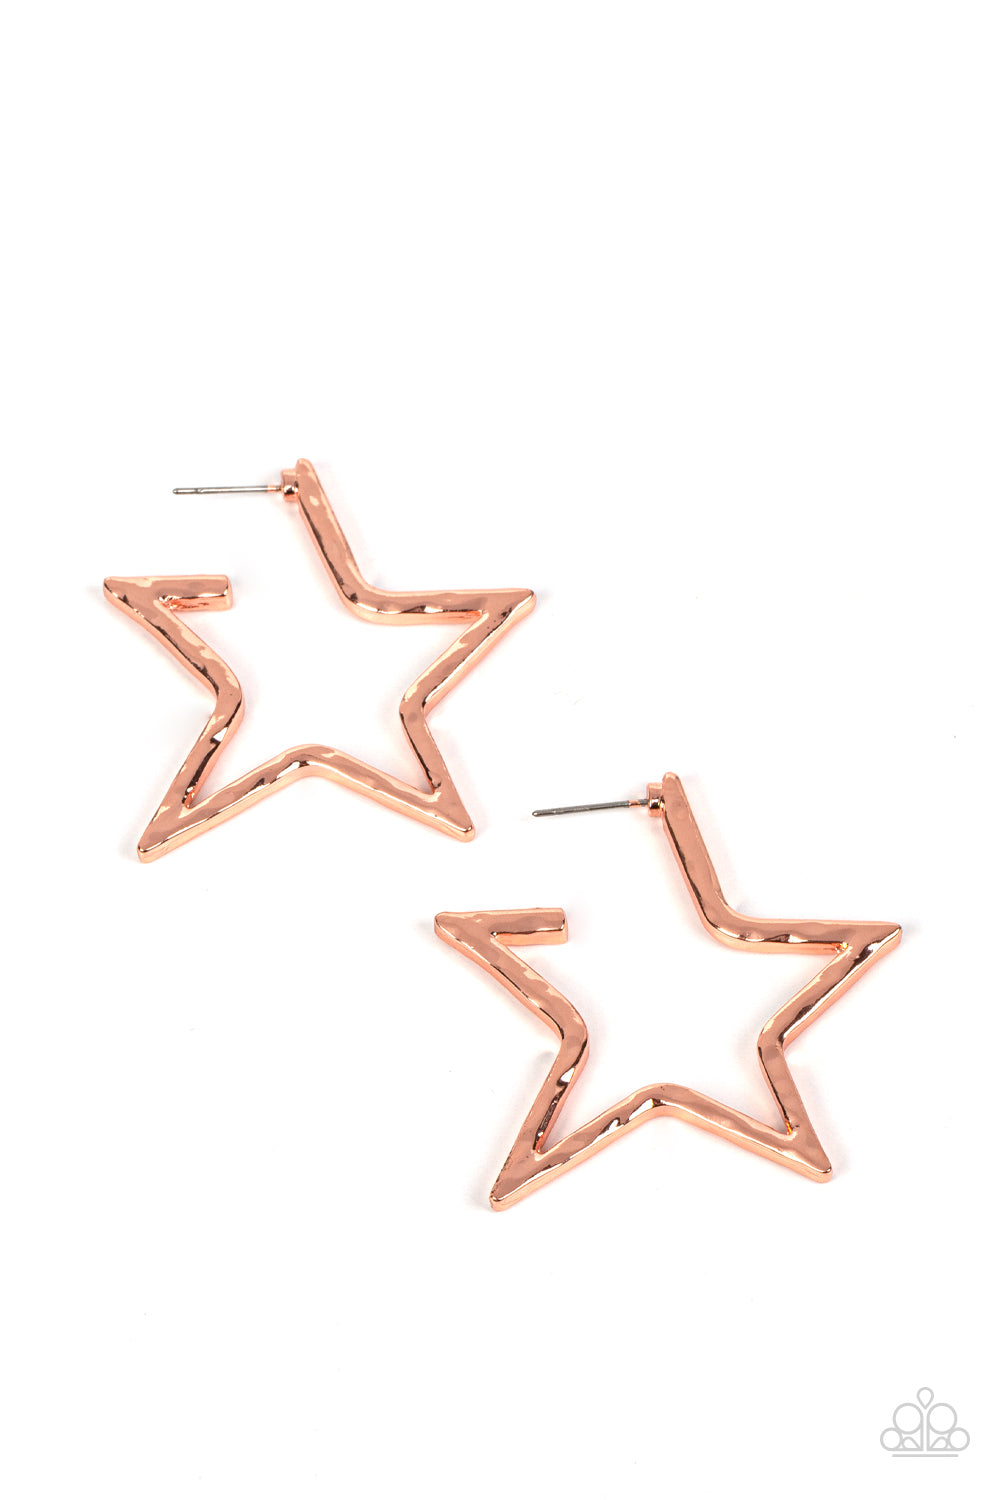 All-Star Attitude Copper Earring - Paparazzi Accessories  A hammered shiny copper bar delicately folds into a star-shaped hoop, resulting in a stellar metallic shimmer. Earring attaches to a standard post fitting.  Sold as one pair of hoop earrings.